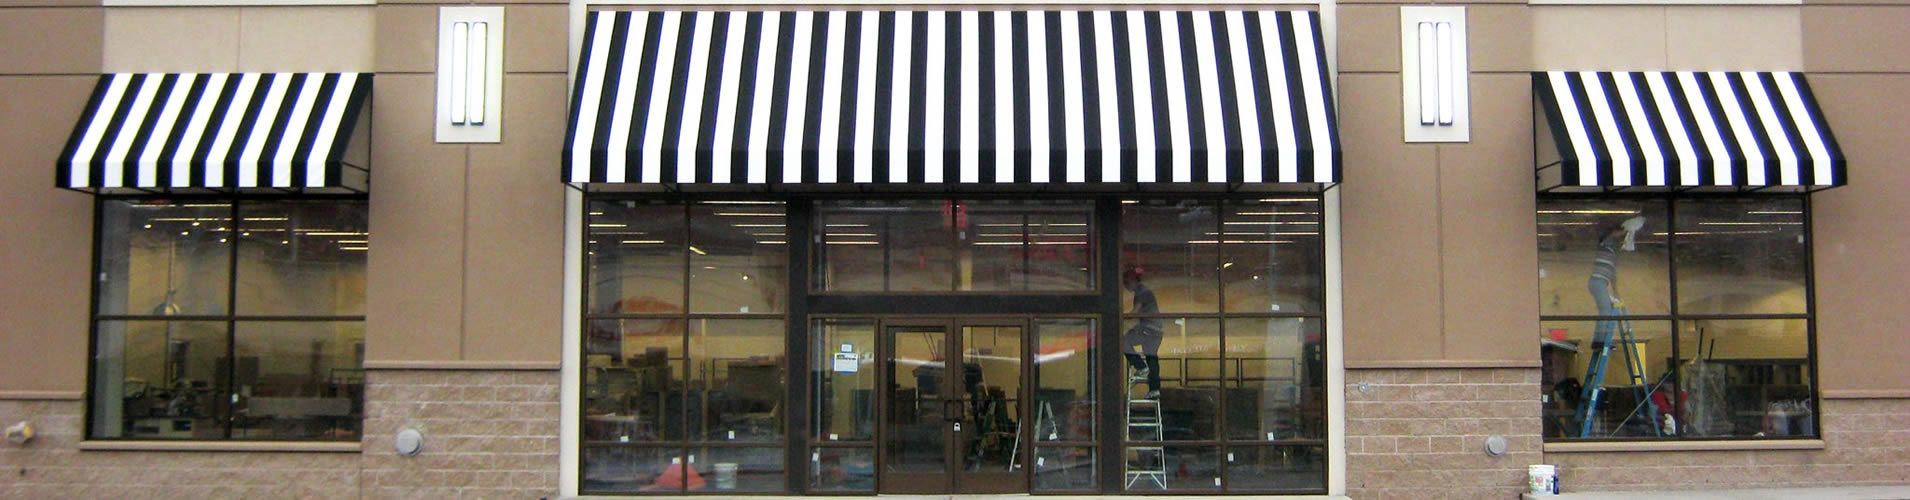 Palm Beach awnings for business buildings